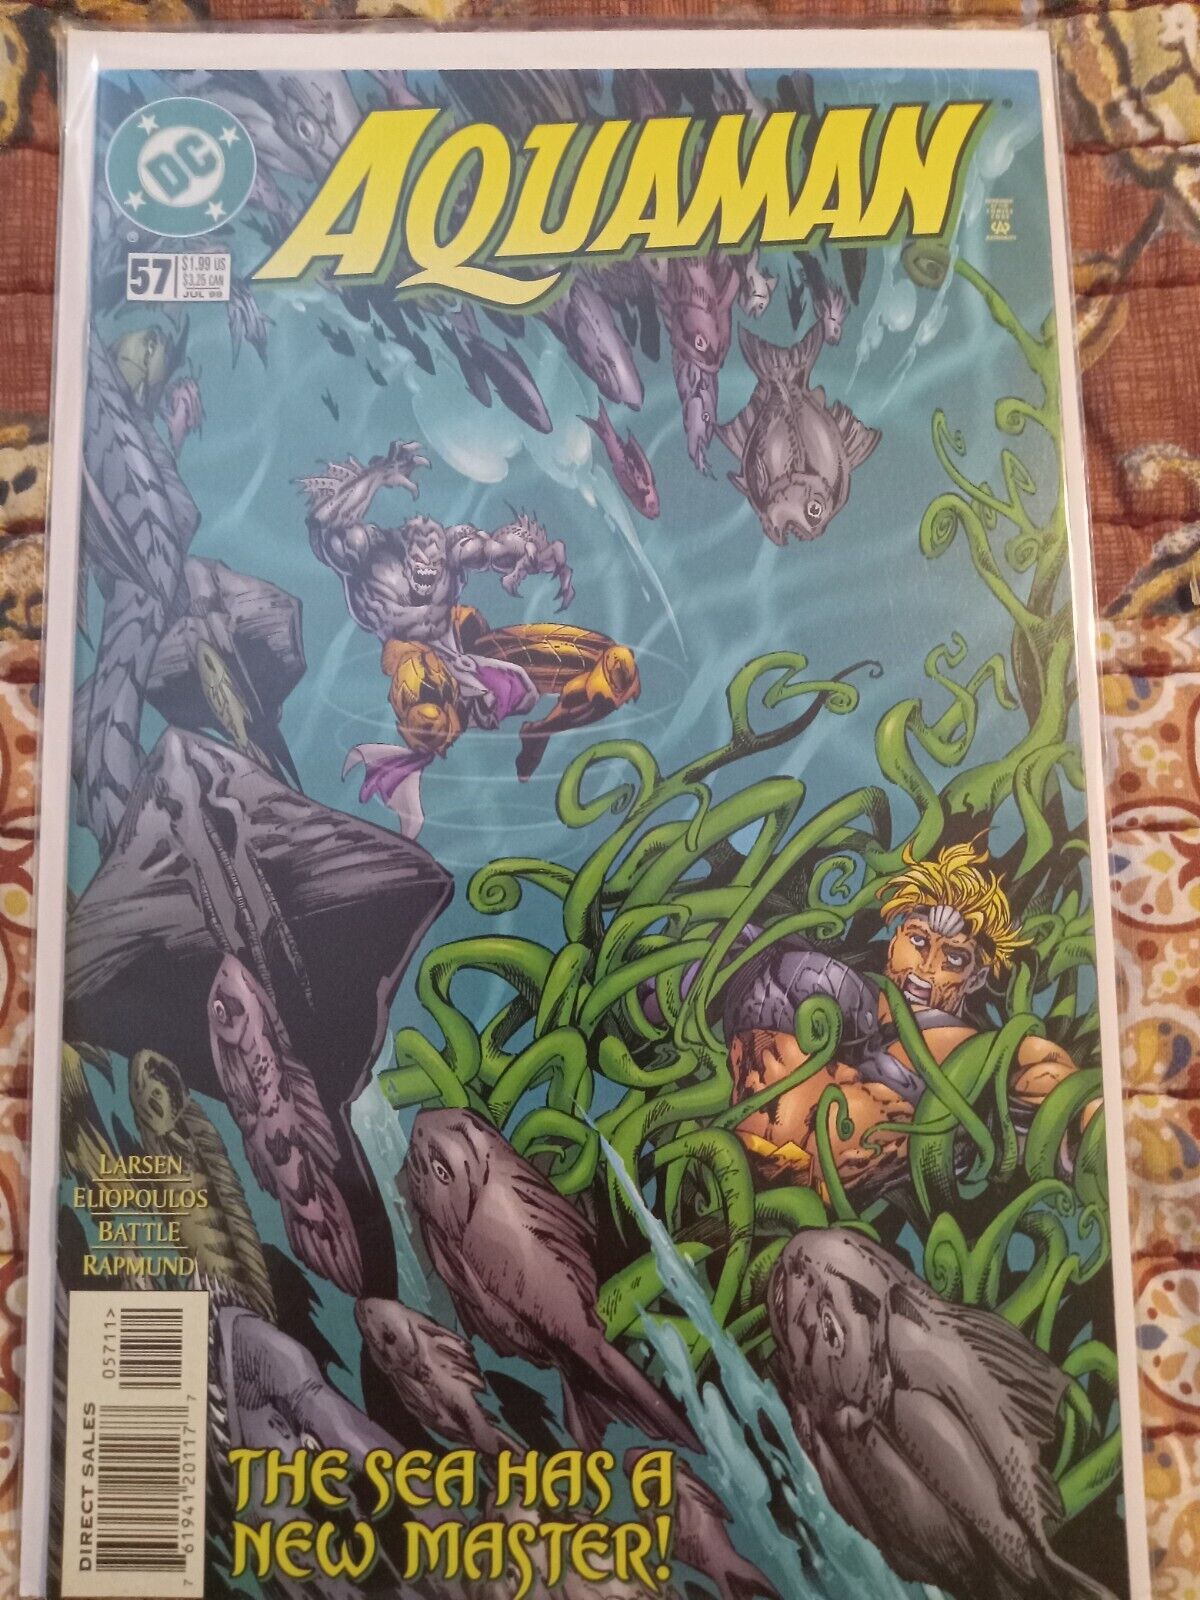 DC Comics - Aquaman 1999 issue #57 bagged and boarded